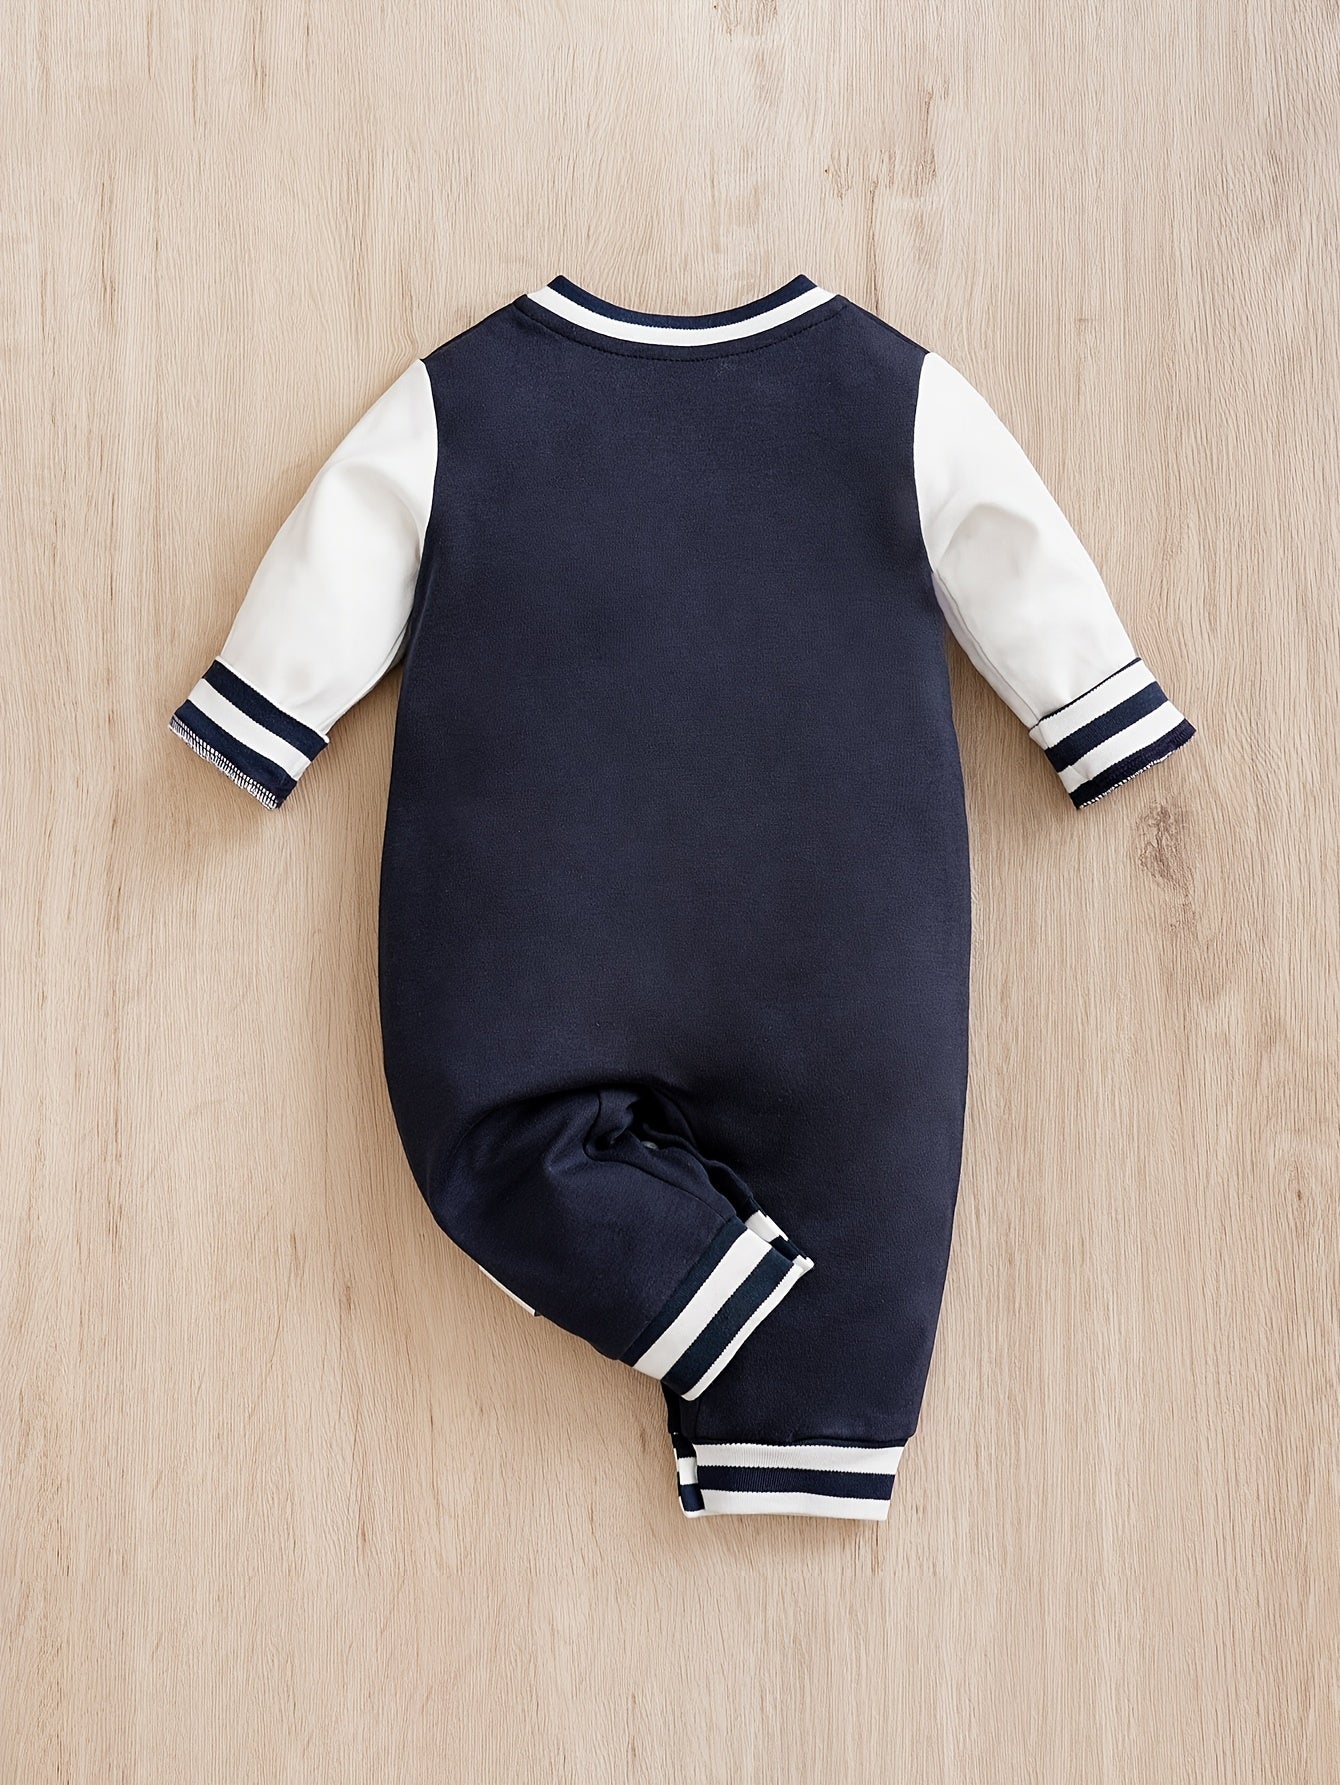 Baby Stylish Letter Color Block Cotton Baseball Jersey, Newborn Infant Boys Long-sleeved Bodysuit For Spring And Autumn